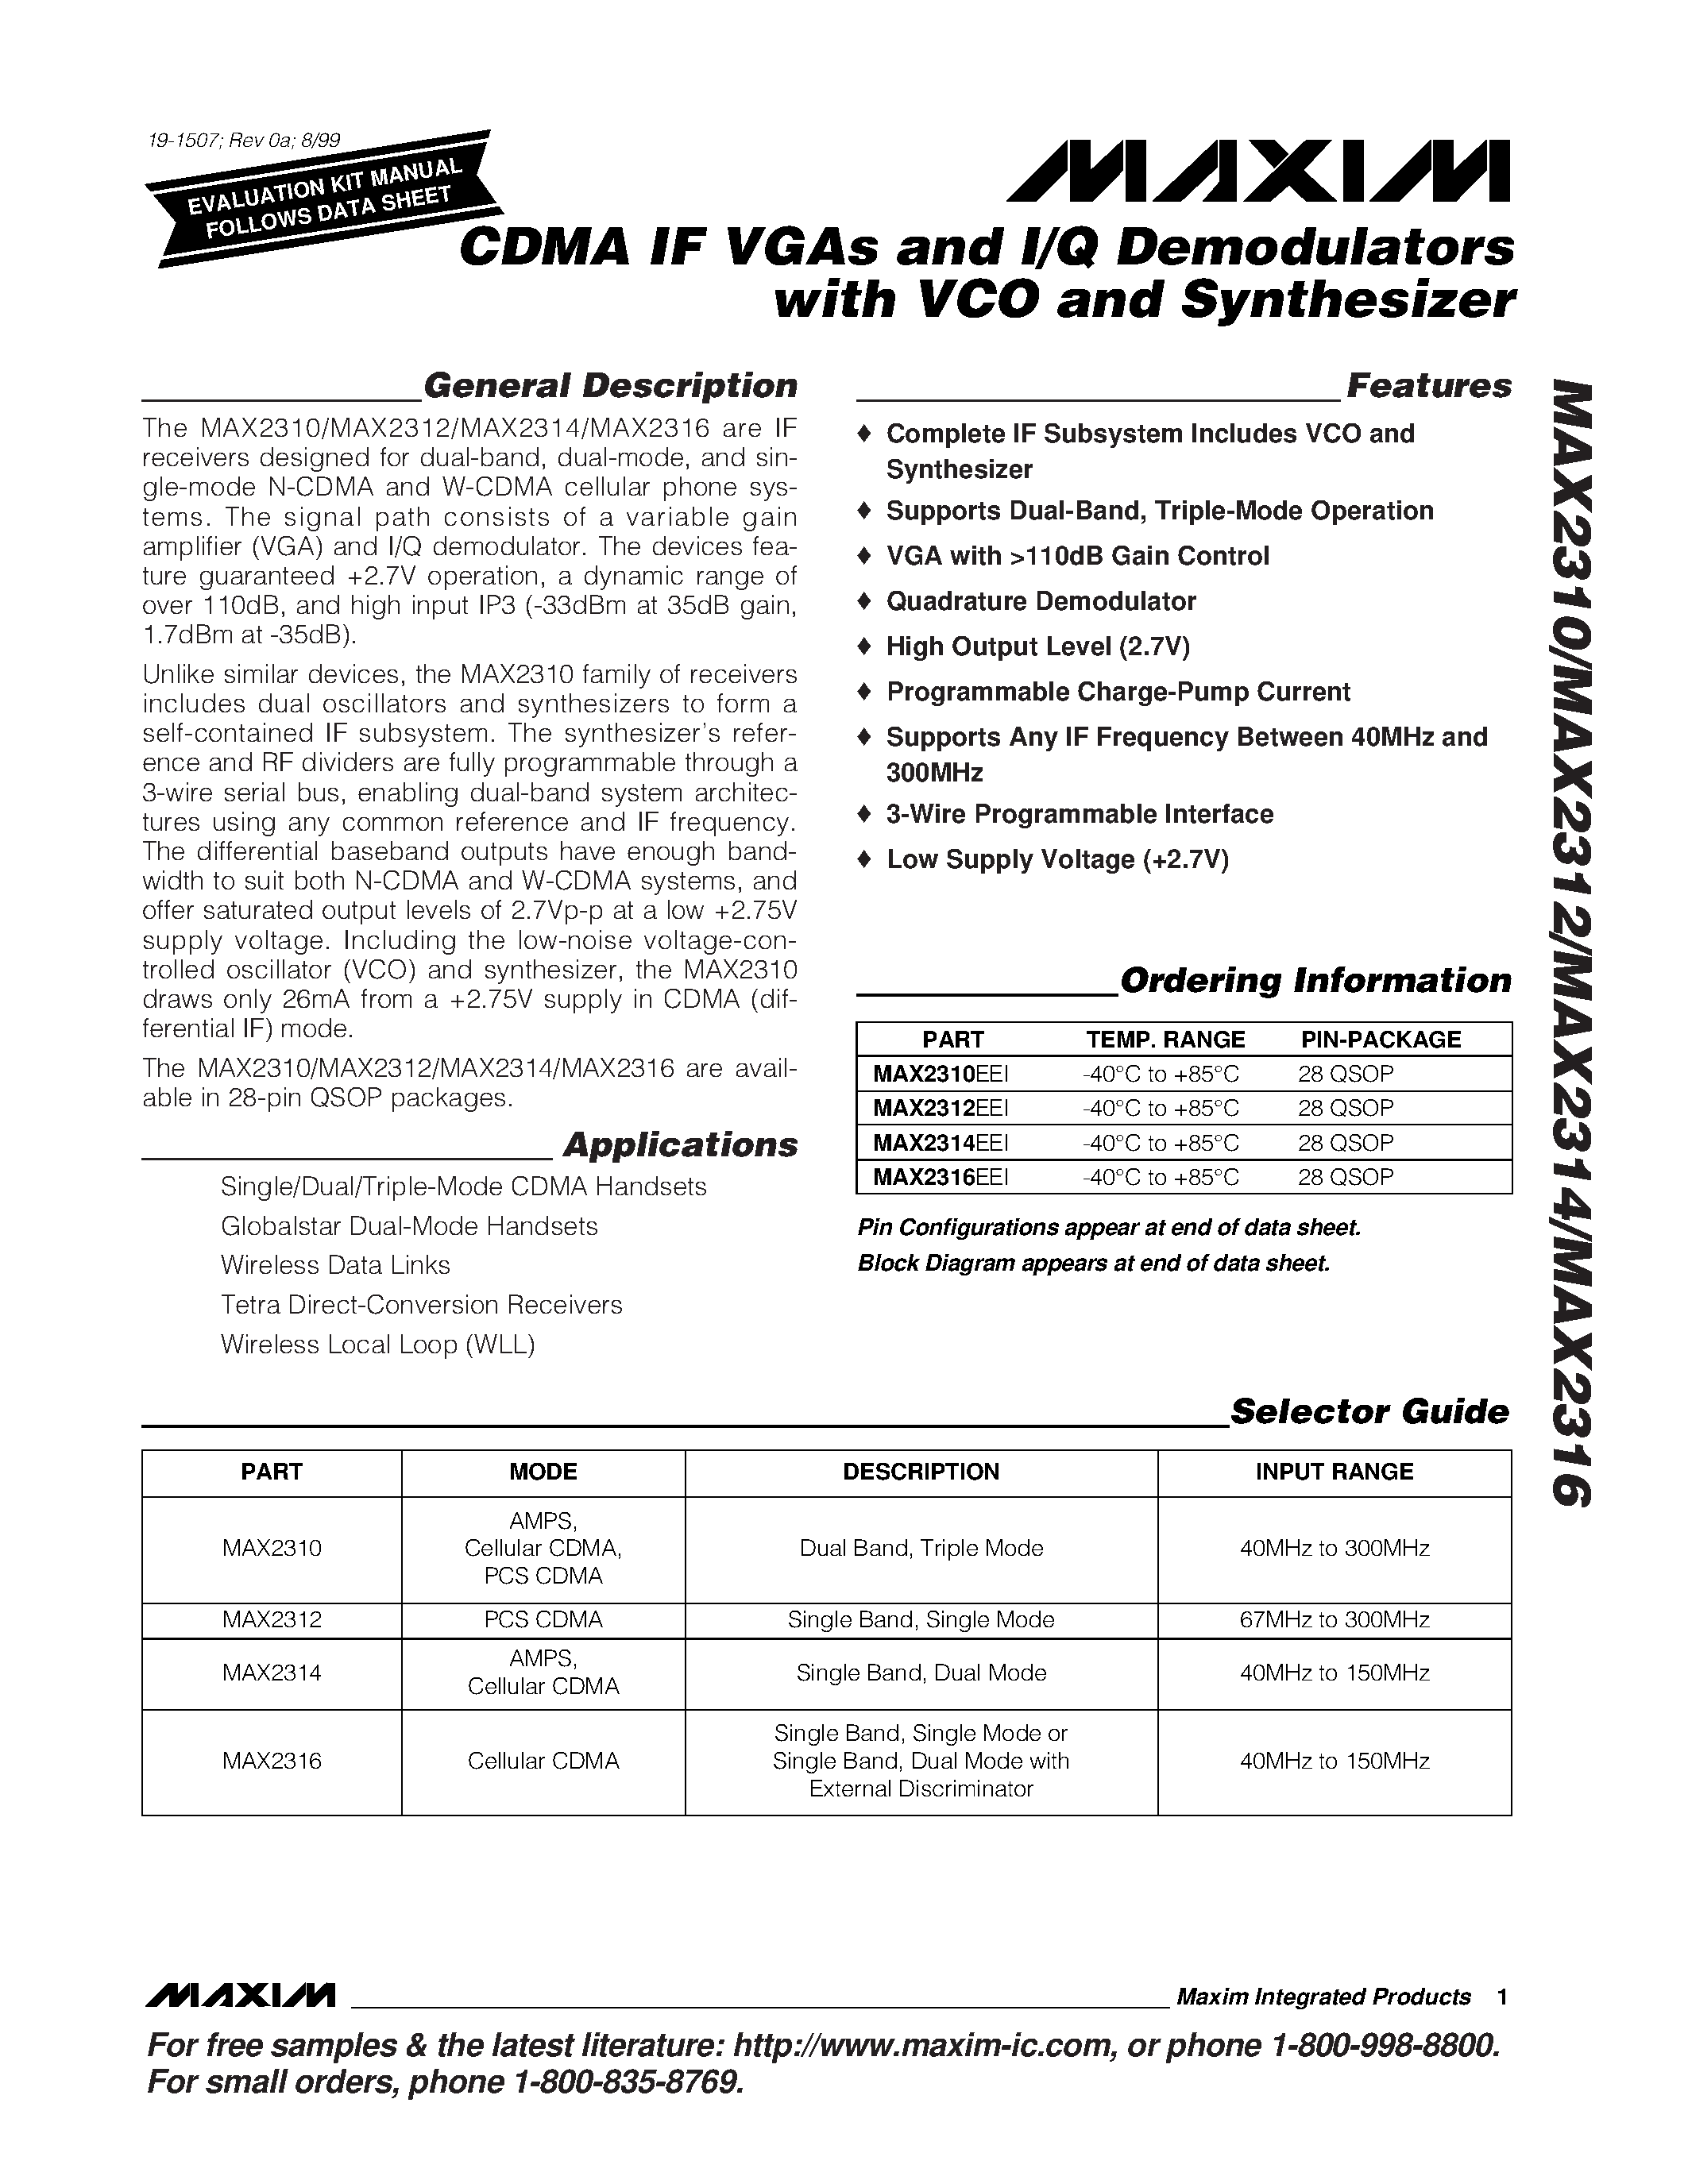 Datasheet MAX2316EEI - CDMA IF VGAs and I/Q Demodulators with VCO and Synthesizer page 1